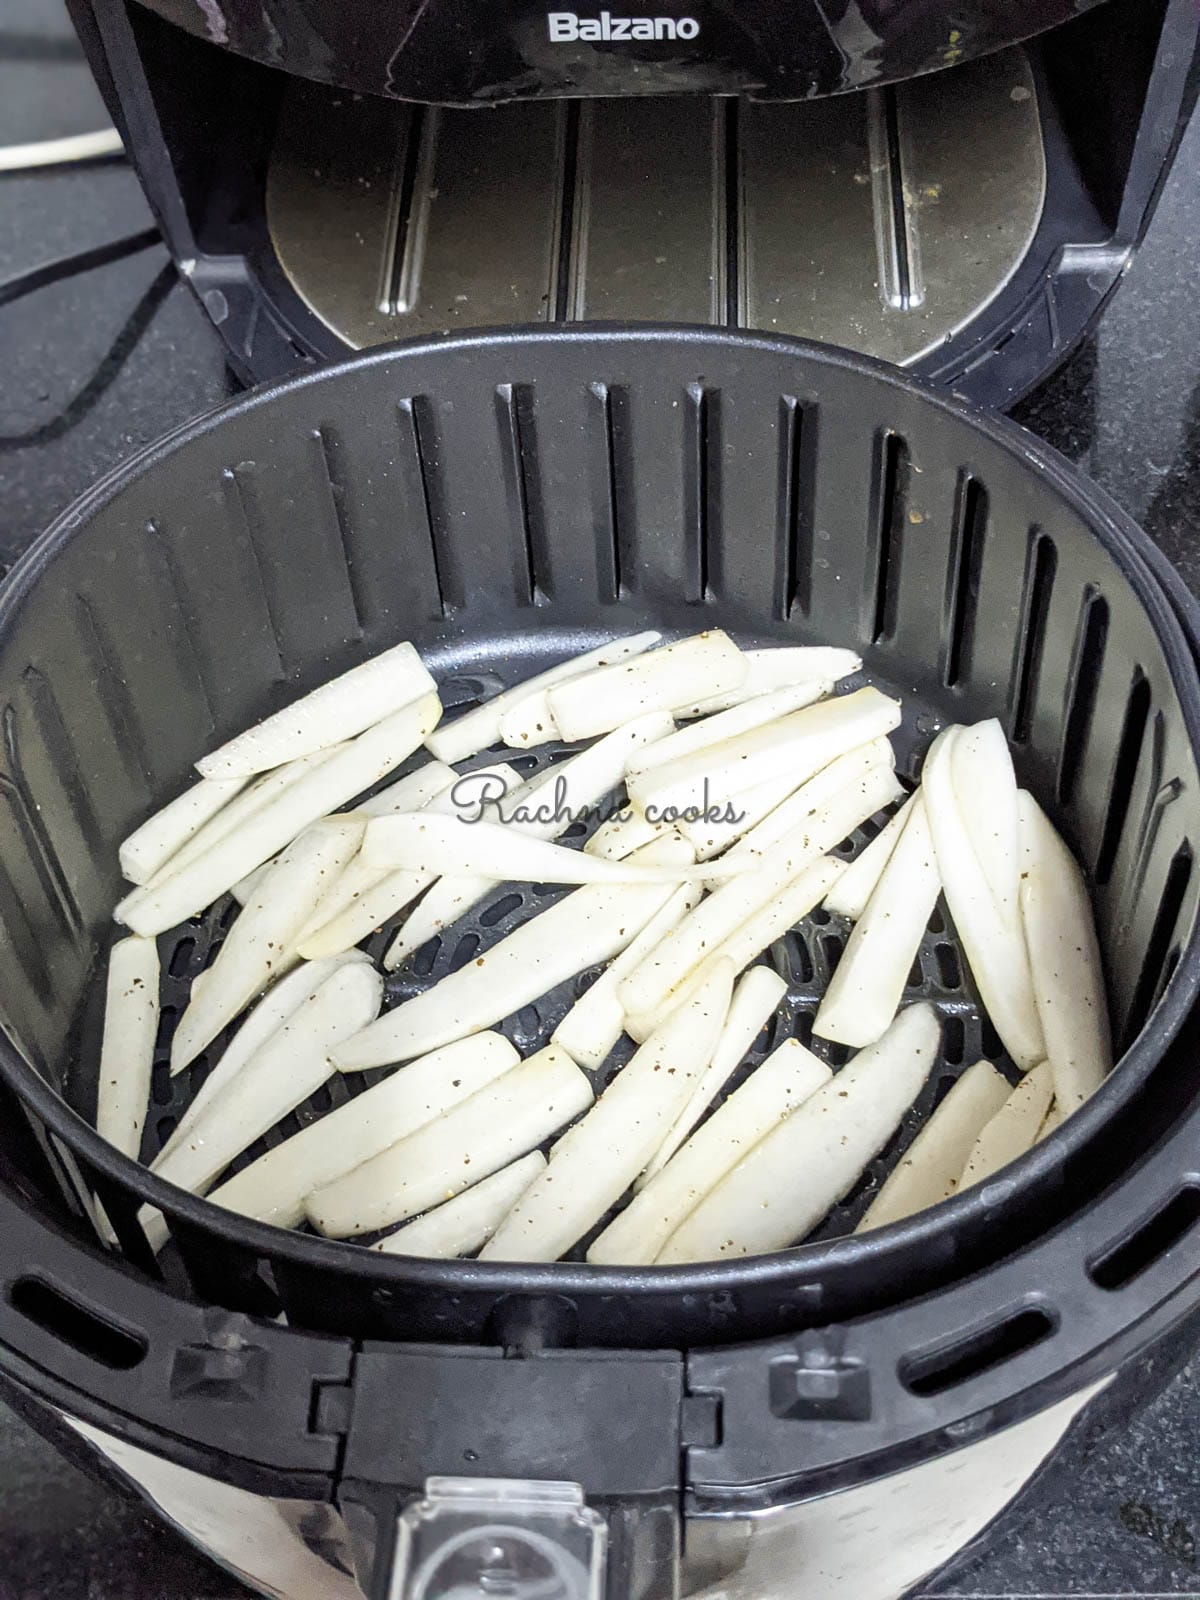 Air fryer basket with one layer of parsnip fries in it ready for air frying.